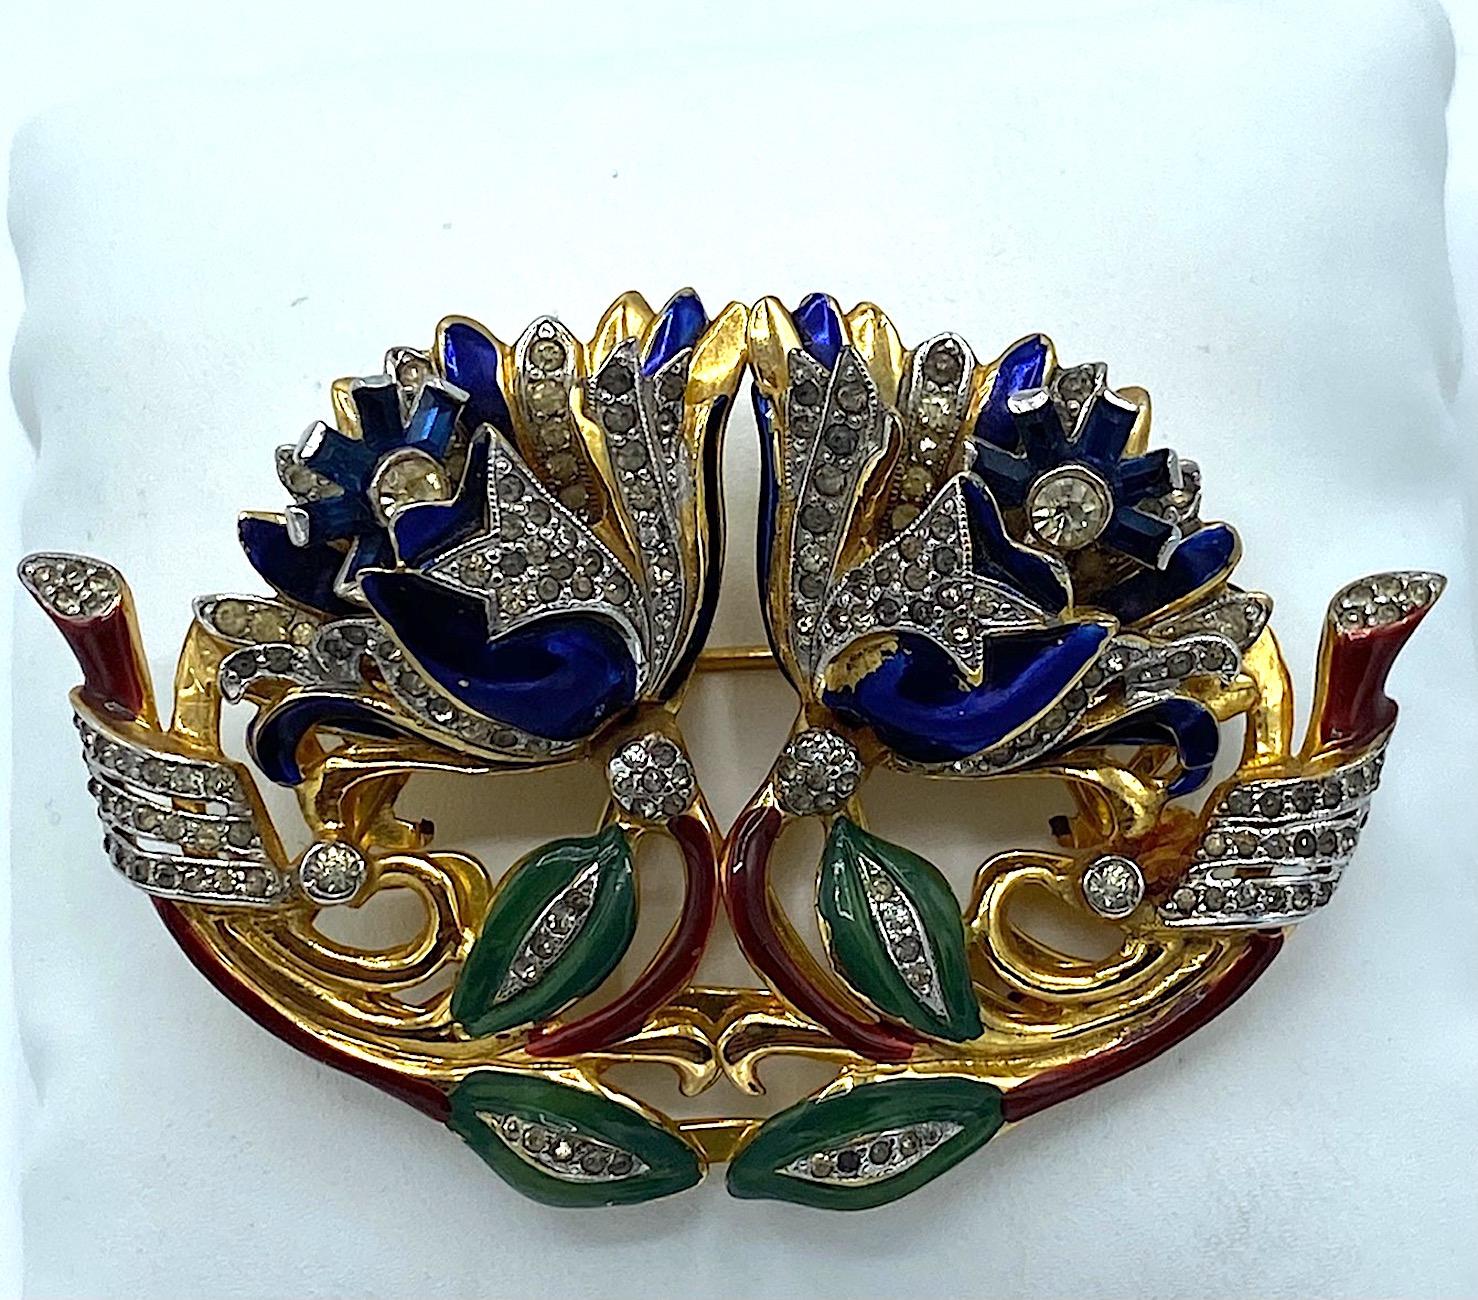 A rare model Coro trembler flower 1940s duette brooch by American fashion jewelry company Coro. Coro was the larges produce of fashion jewelry and operated from 1901 to 1978. The gold plate is shiny and rich in color with little to no wear. The